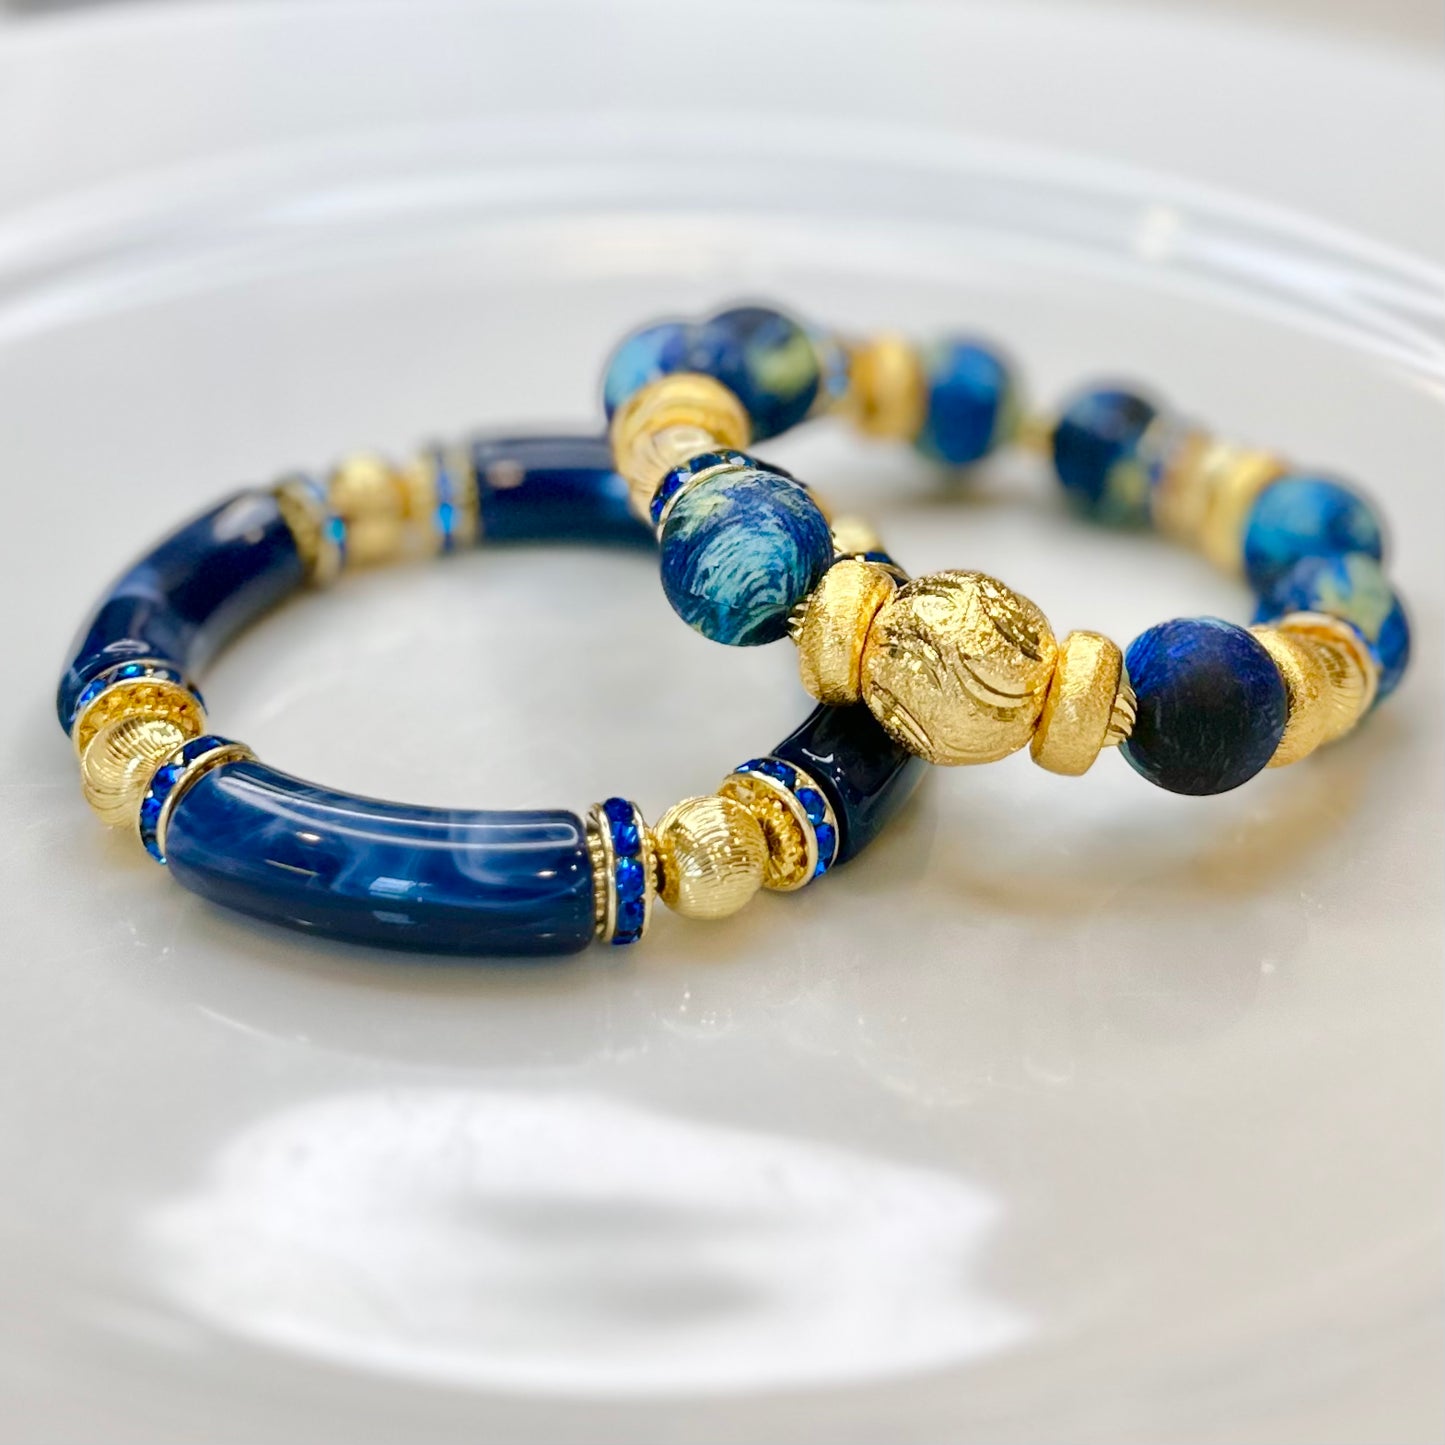 NAVY BLUE AND GOLD LINK BRACELET WITH CZ ACCENTS